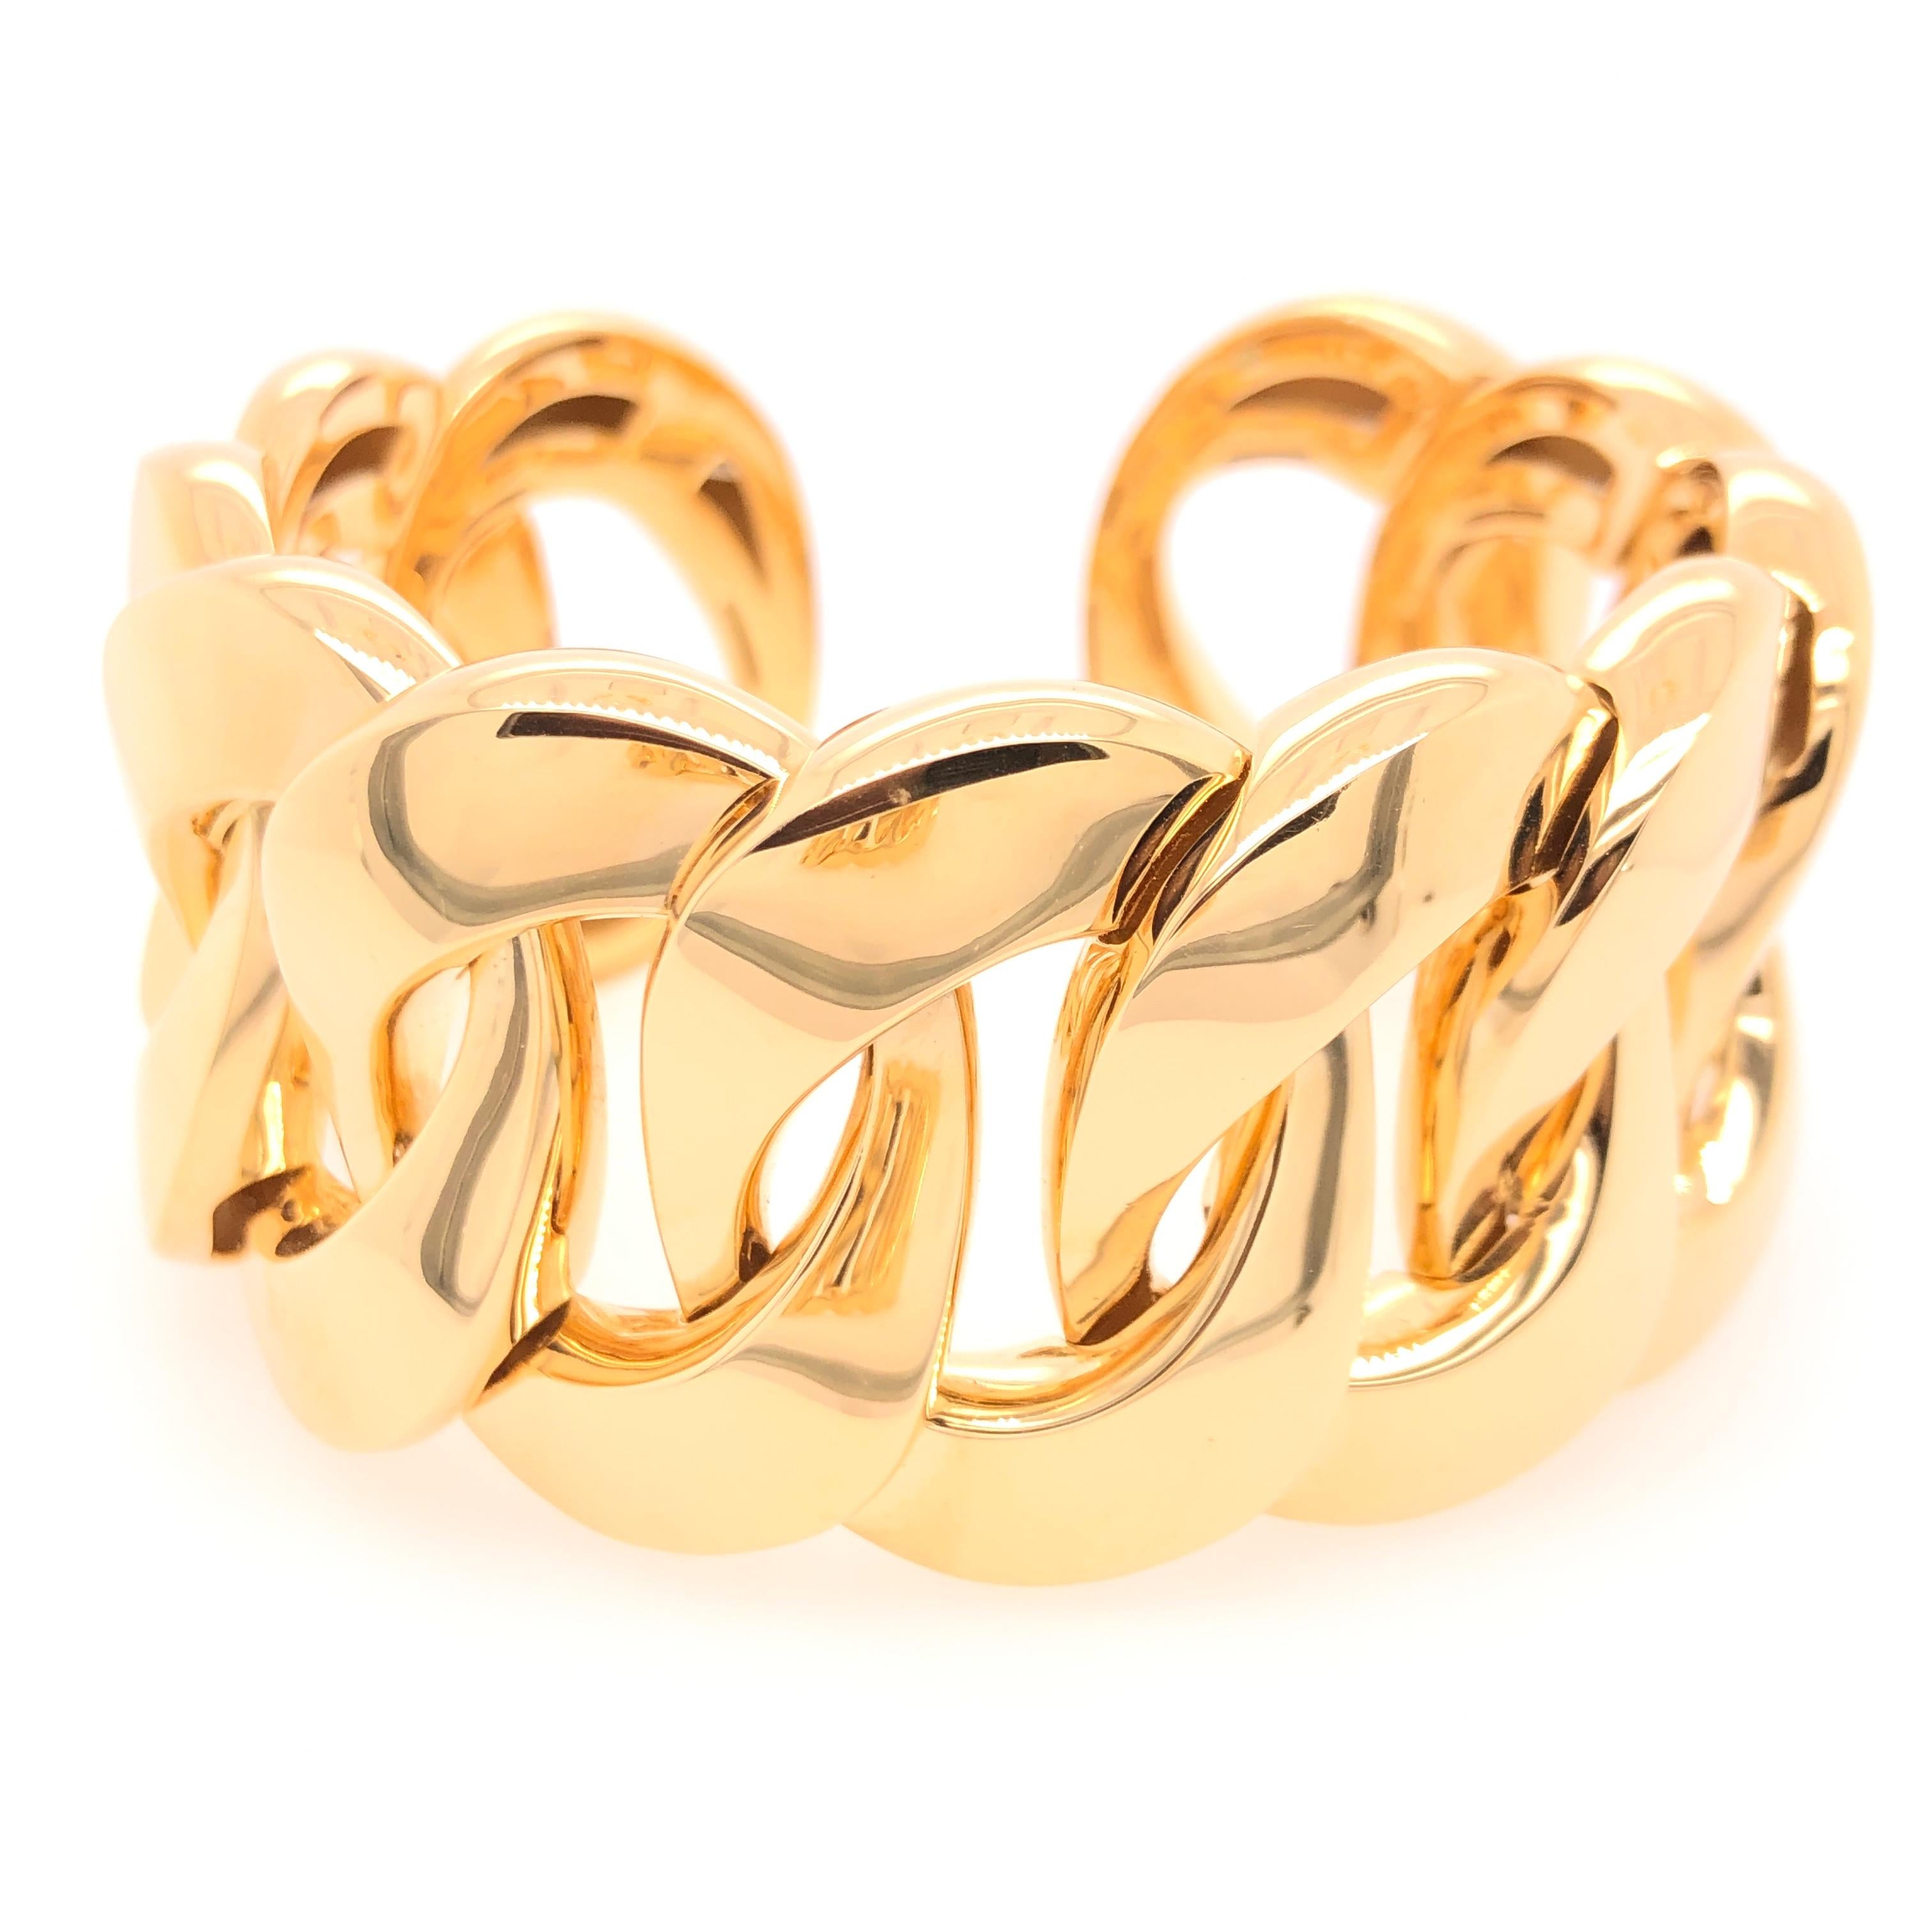 Vaid's 18K yellow gold link cuff adds a sense of strength and grace to whatever you are wearing. We can see this paired with you favorite pair of jeans or complimenting a fine silk gown ready for the opera. You're imagination is the limit!  

Size: